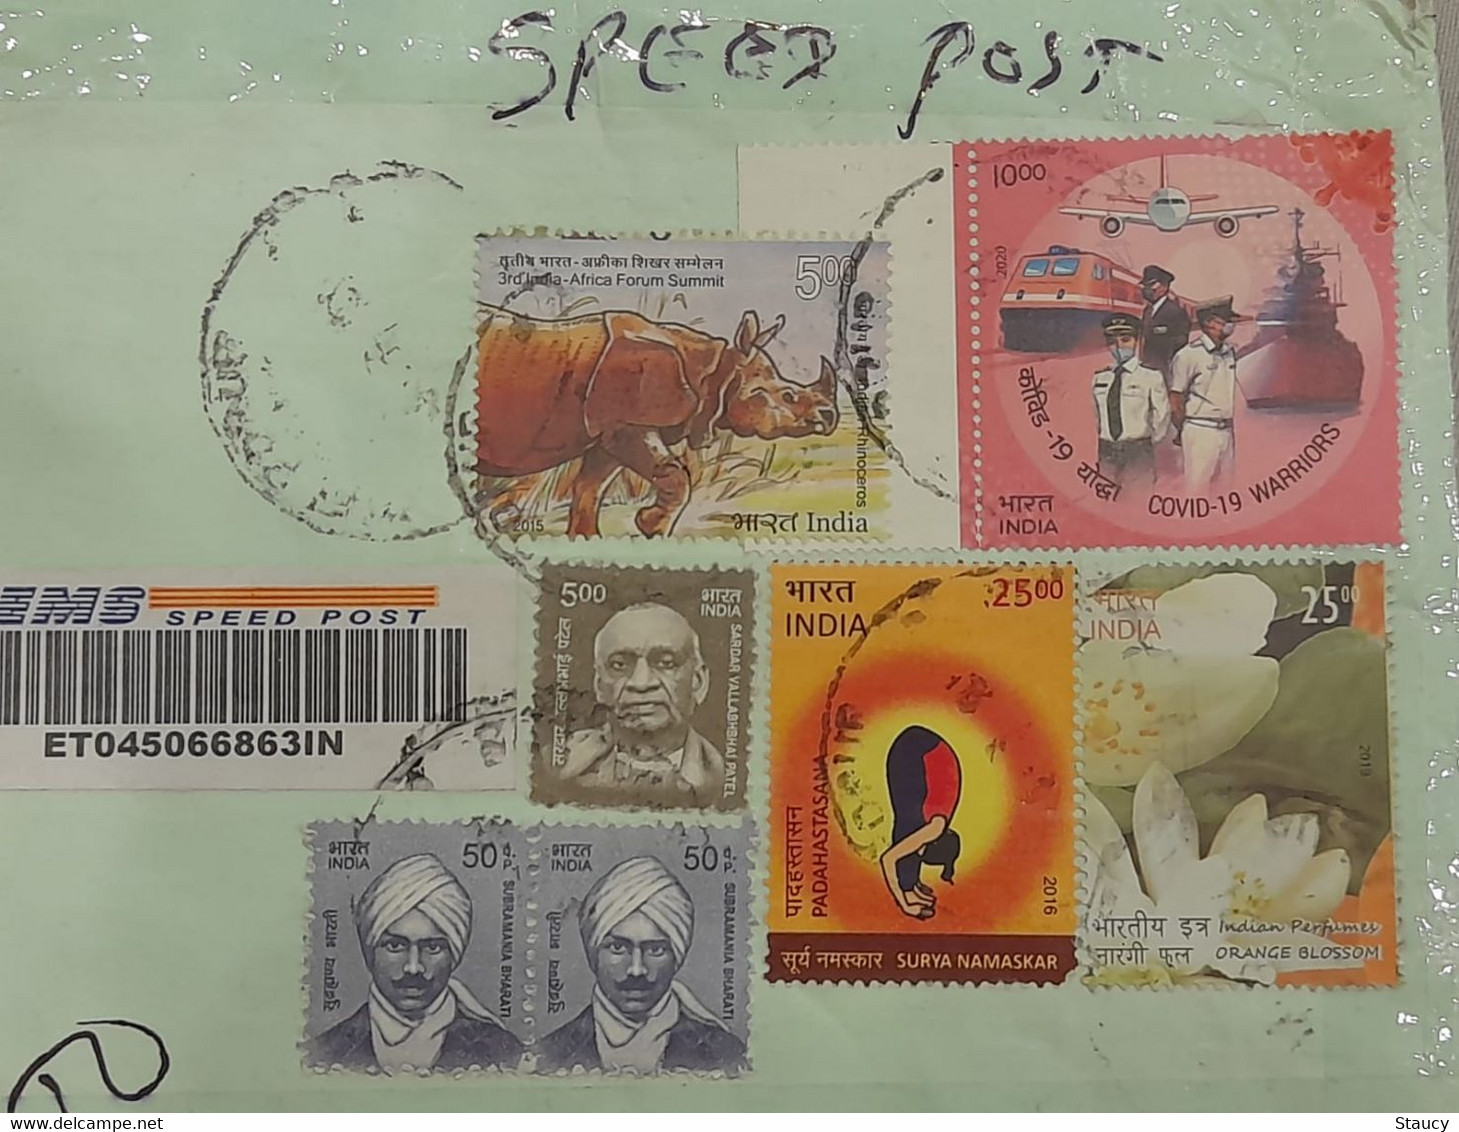 INDIA 2020 Salute To Pandemic / Covid-19 Warriors Stamp Franking On Registered Speed Post Cover As Per Scan - First Aid